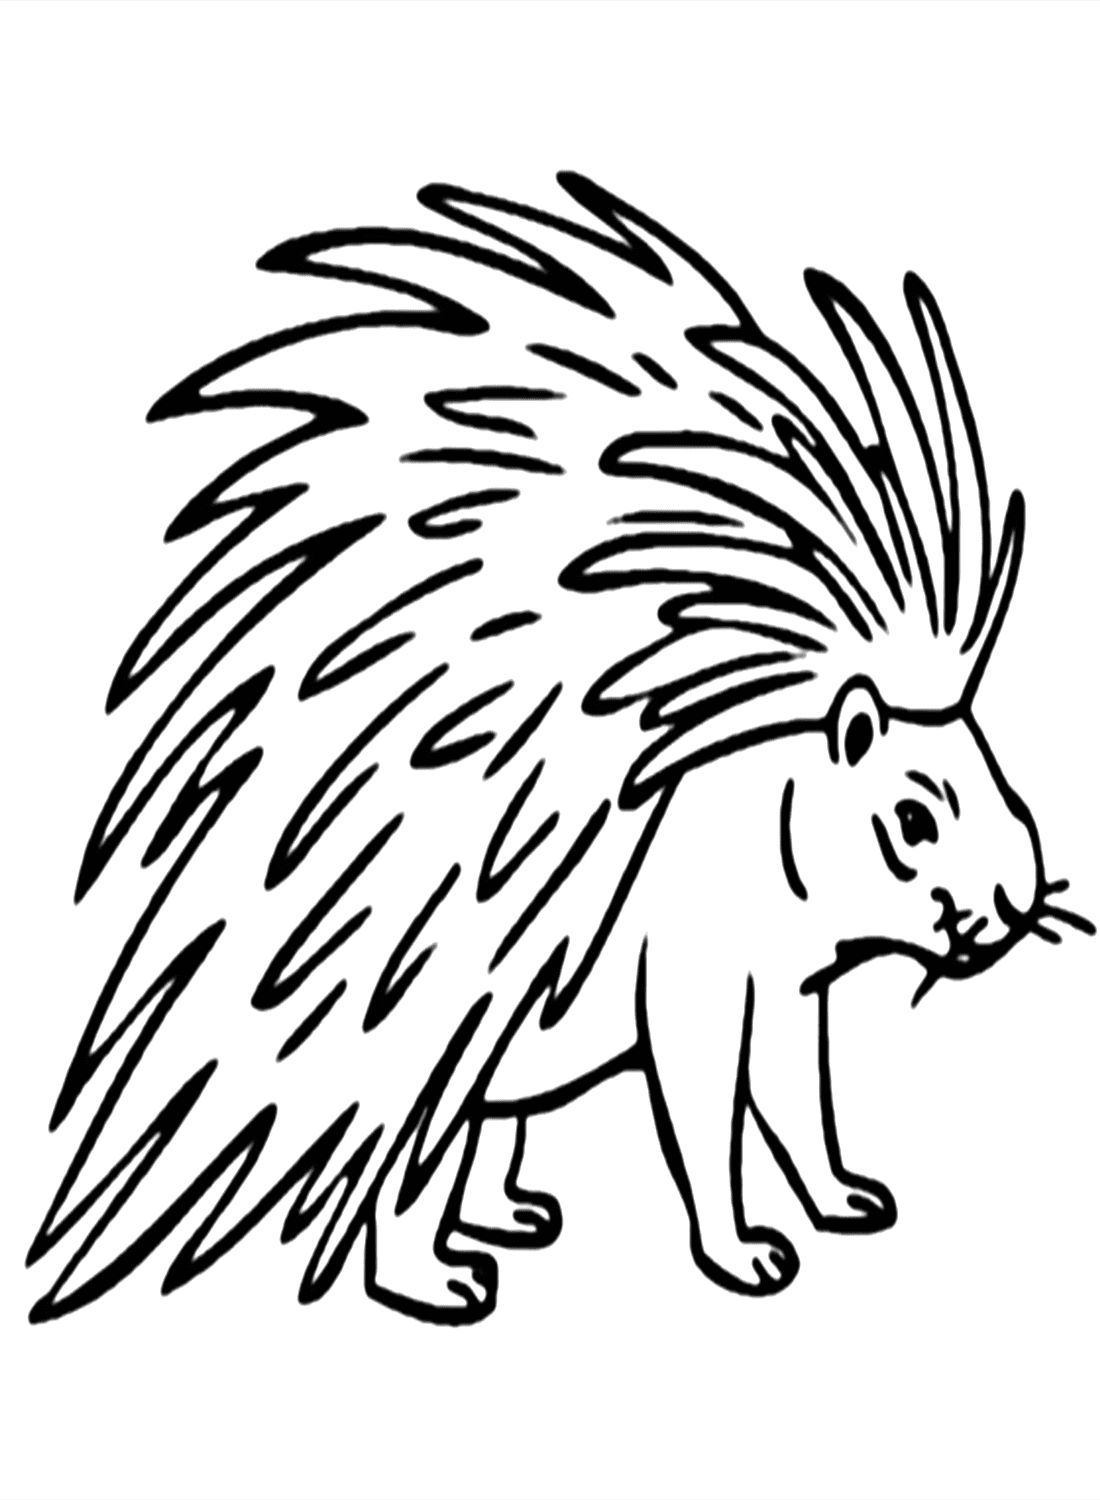 Picture Porcupine To Color from Porcupine